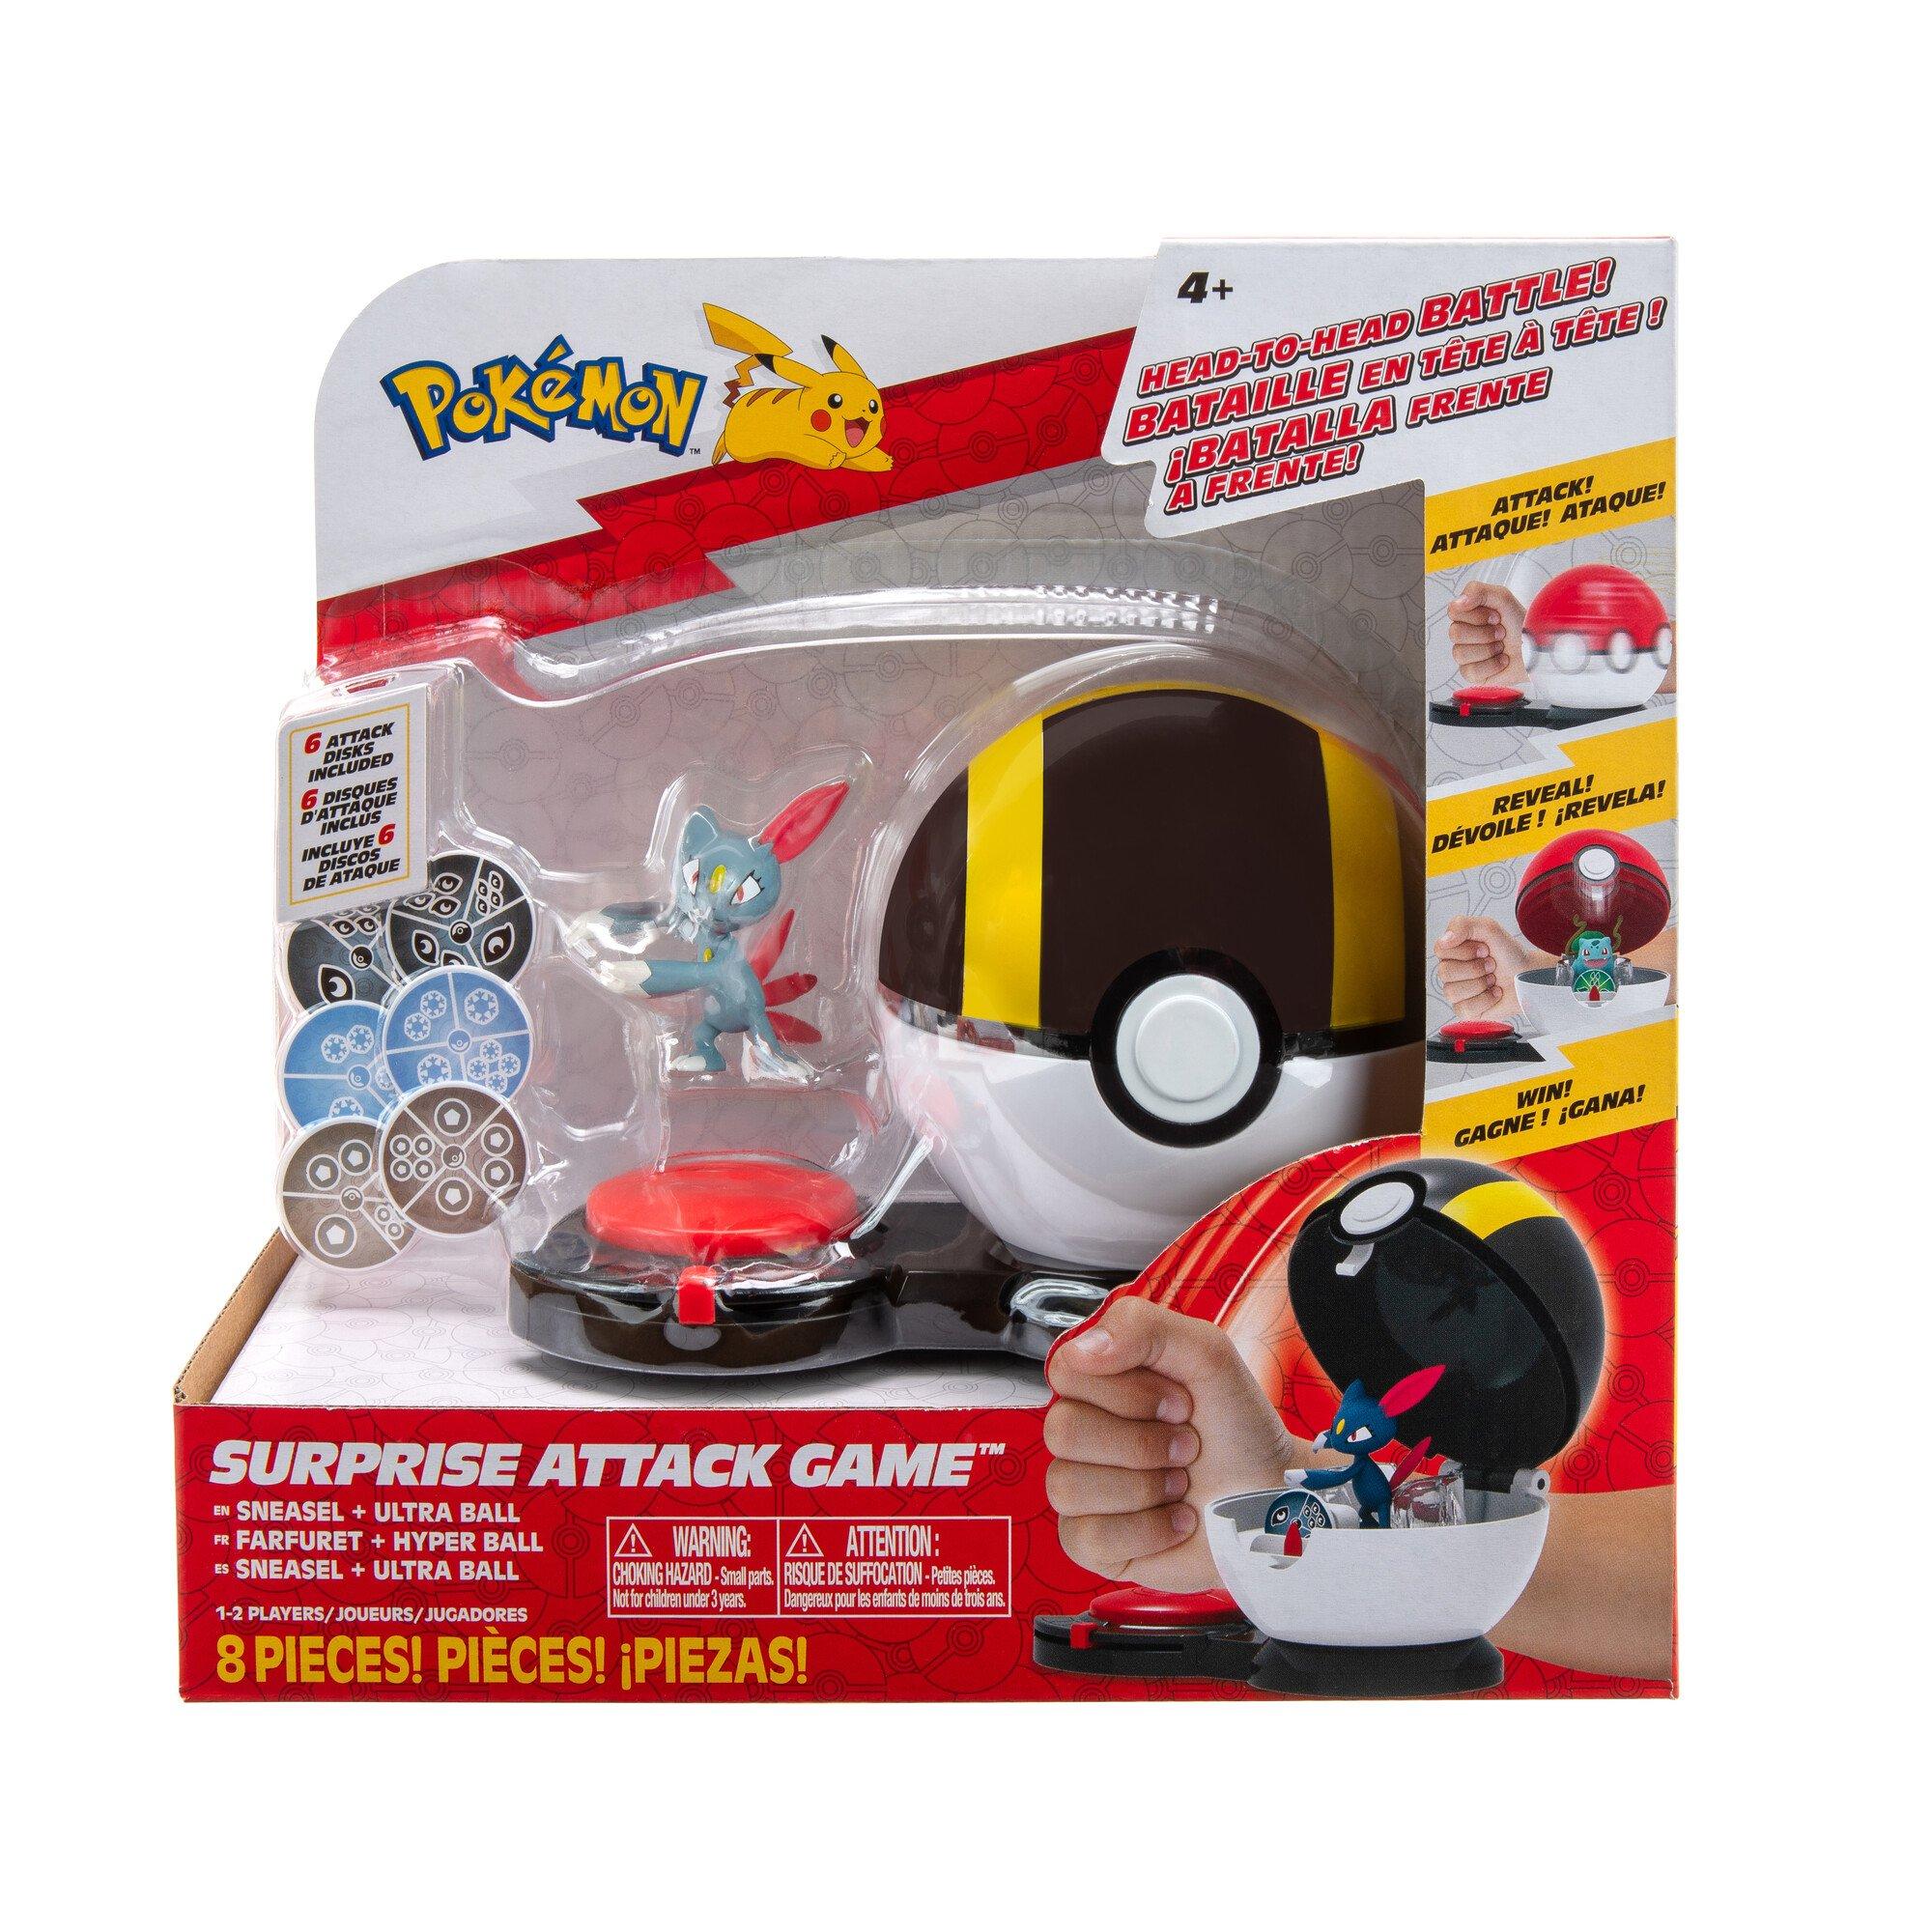 Pokemon Surprise Attack Game with Ultra Ball - Single Pack